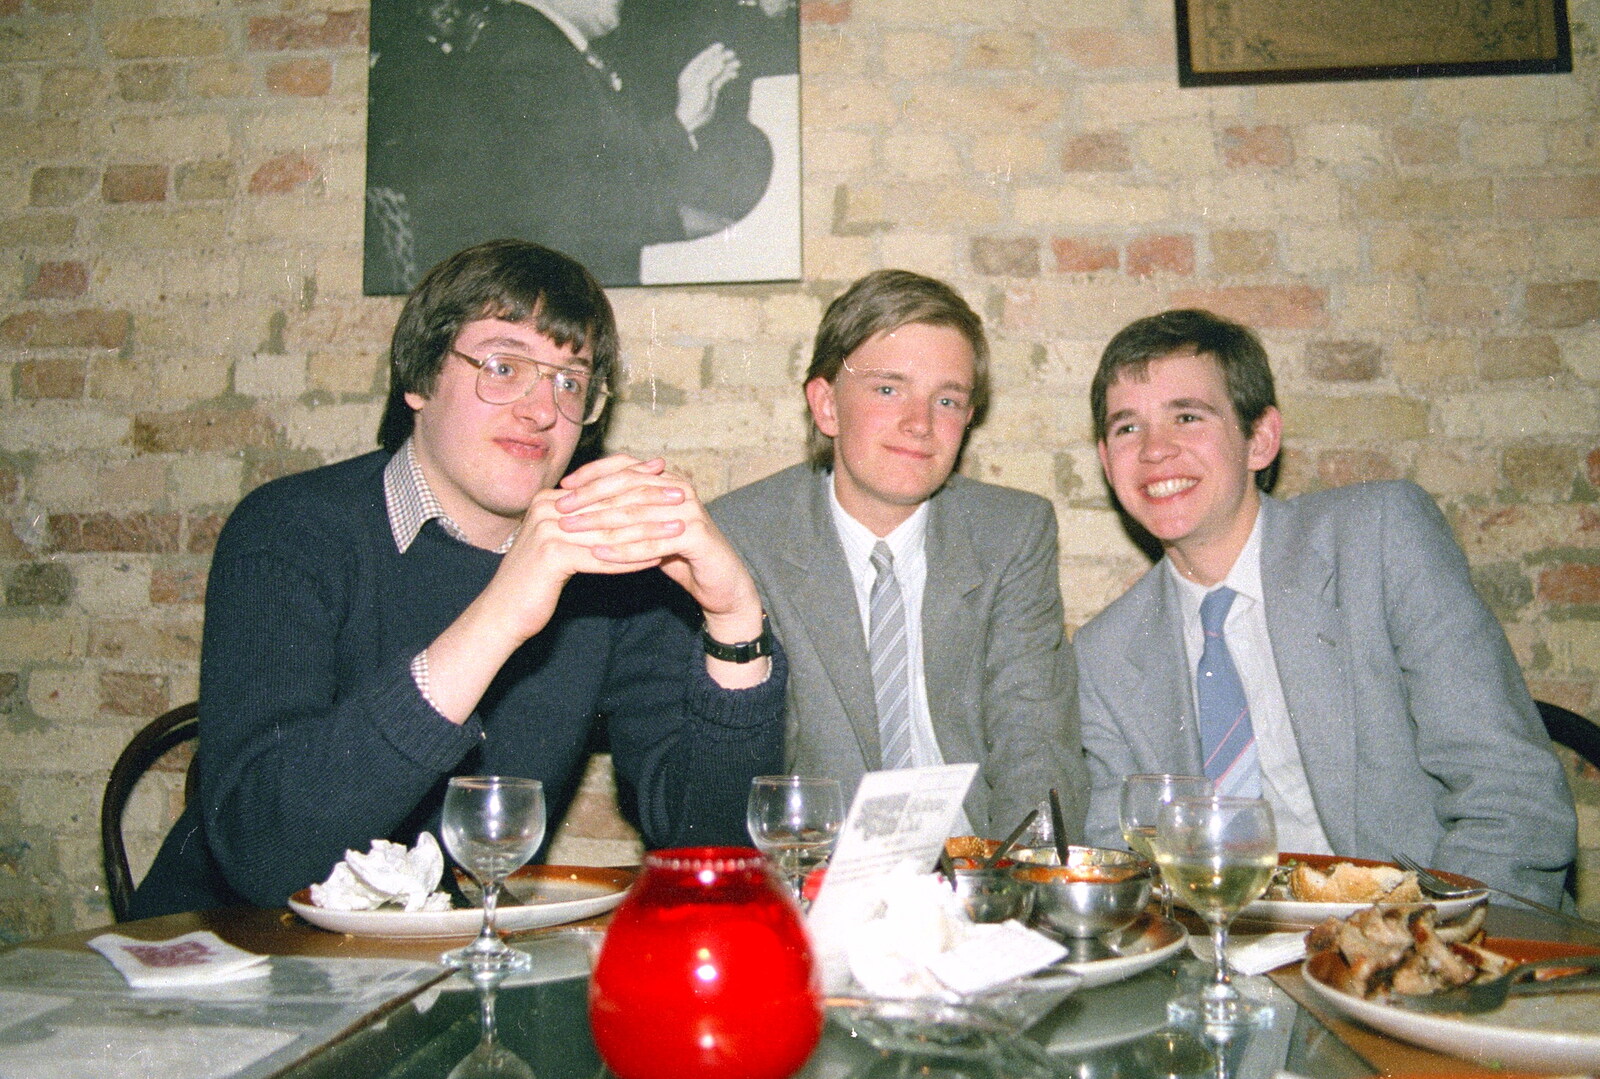 Duncan, Nosher and Phil from A Trip to Trinity College, Cambridge - 23rd March 1986